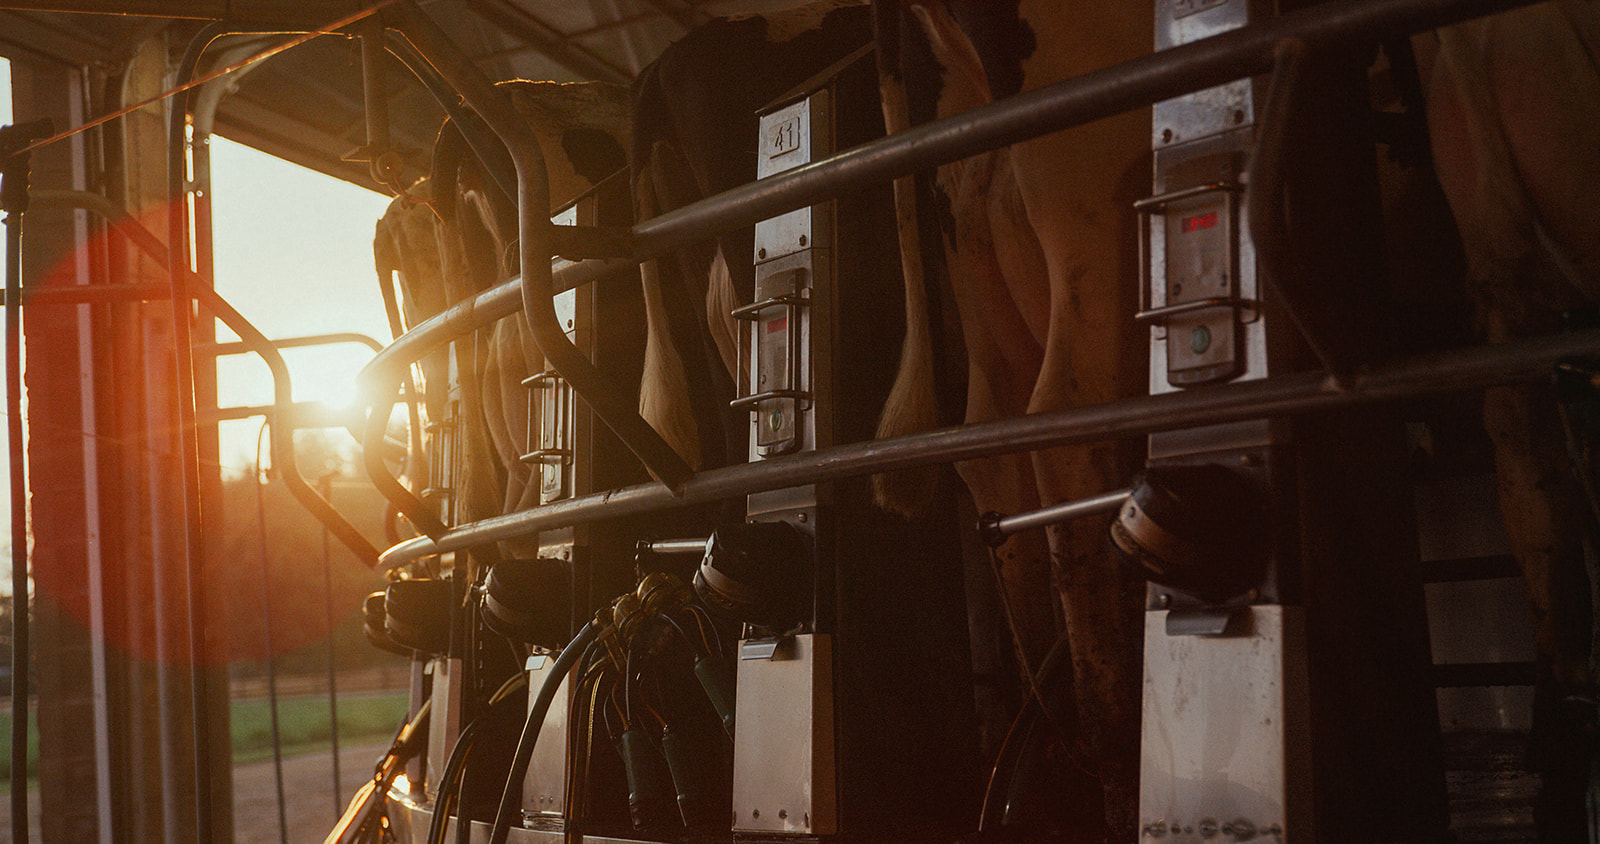 Cows being milked in a rotary milking parlour